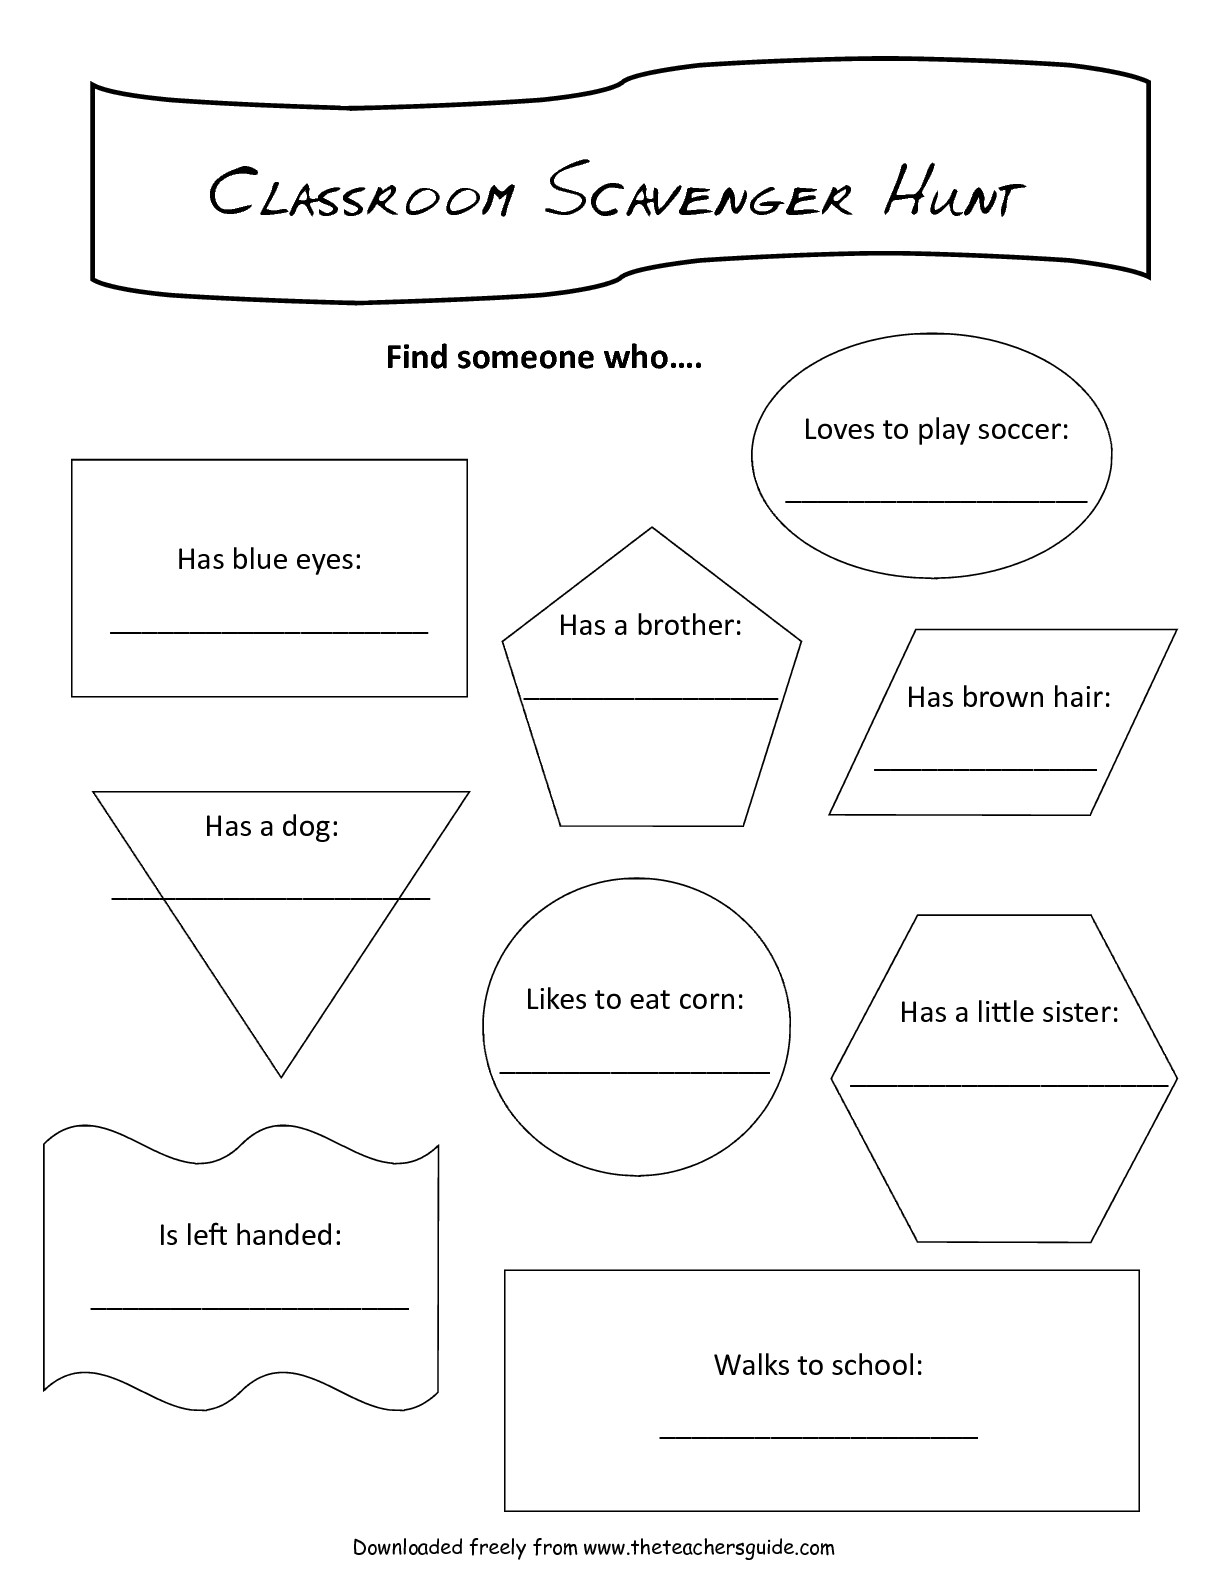 16-best-images-of-getting-to-know-you-worksheet-classroom-scavenger-hunt-worksheet-getting-to